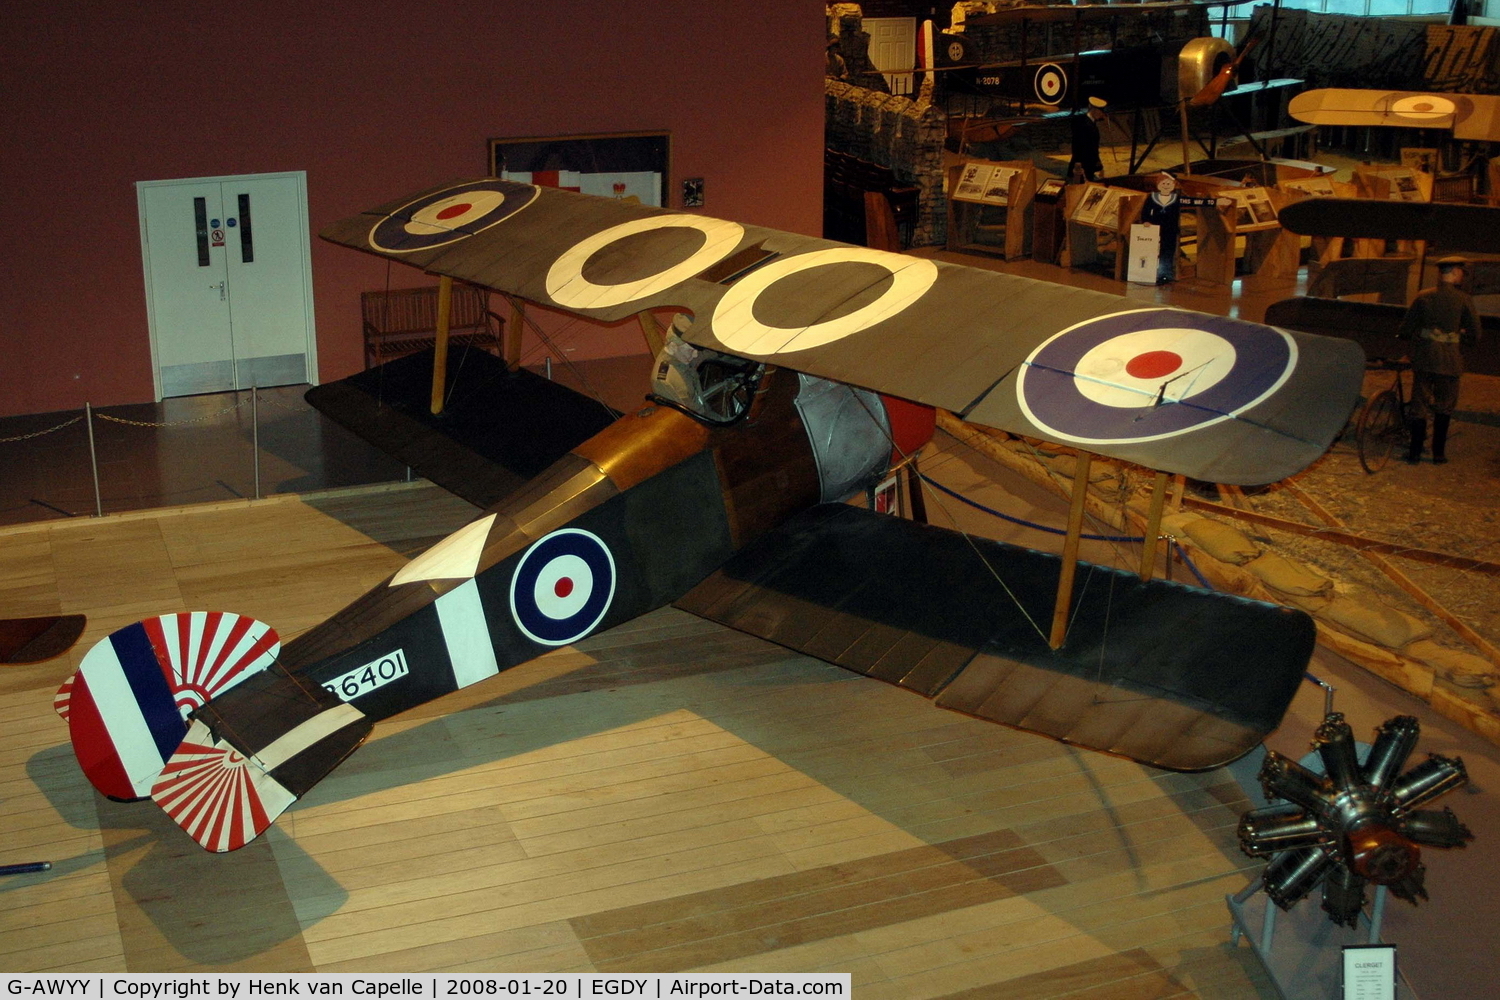 G-AWYY, 1969 Slingsby Sopwith F-1 Camel Replica C/N 1701, Camel replica, now preserved in Fleet Air Arm Museum as B6401.